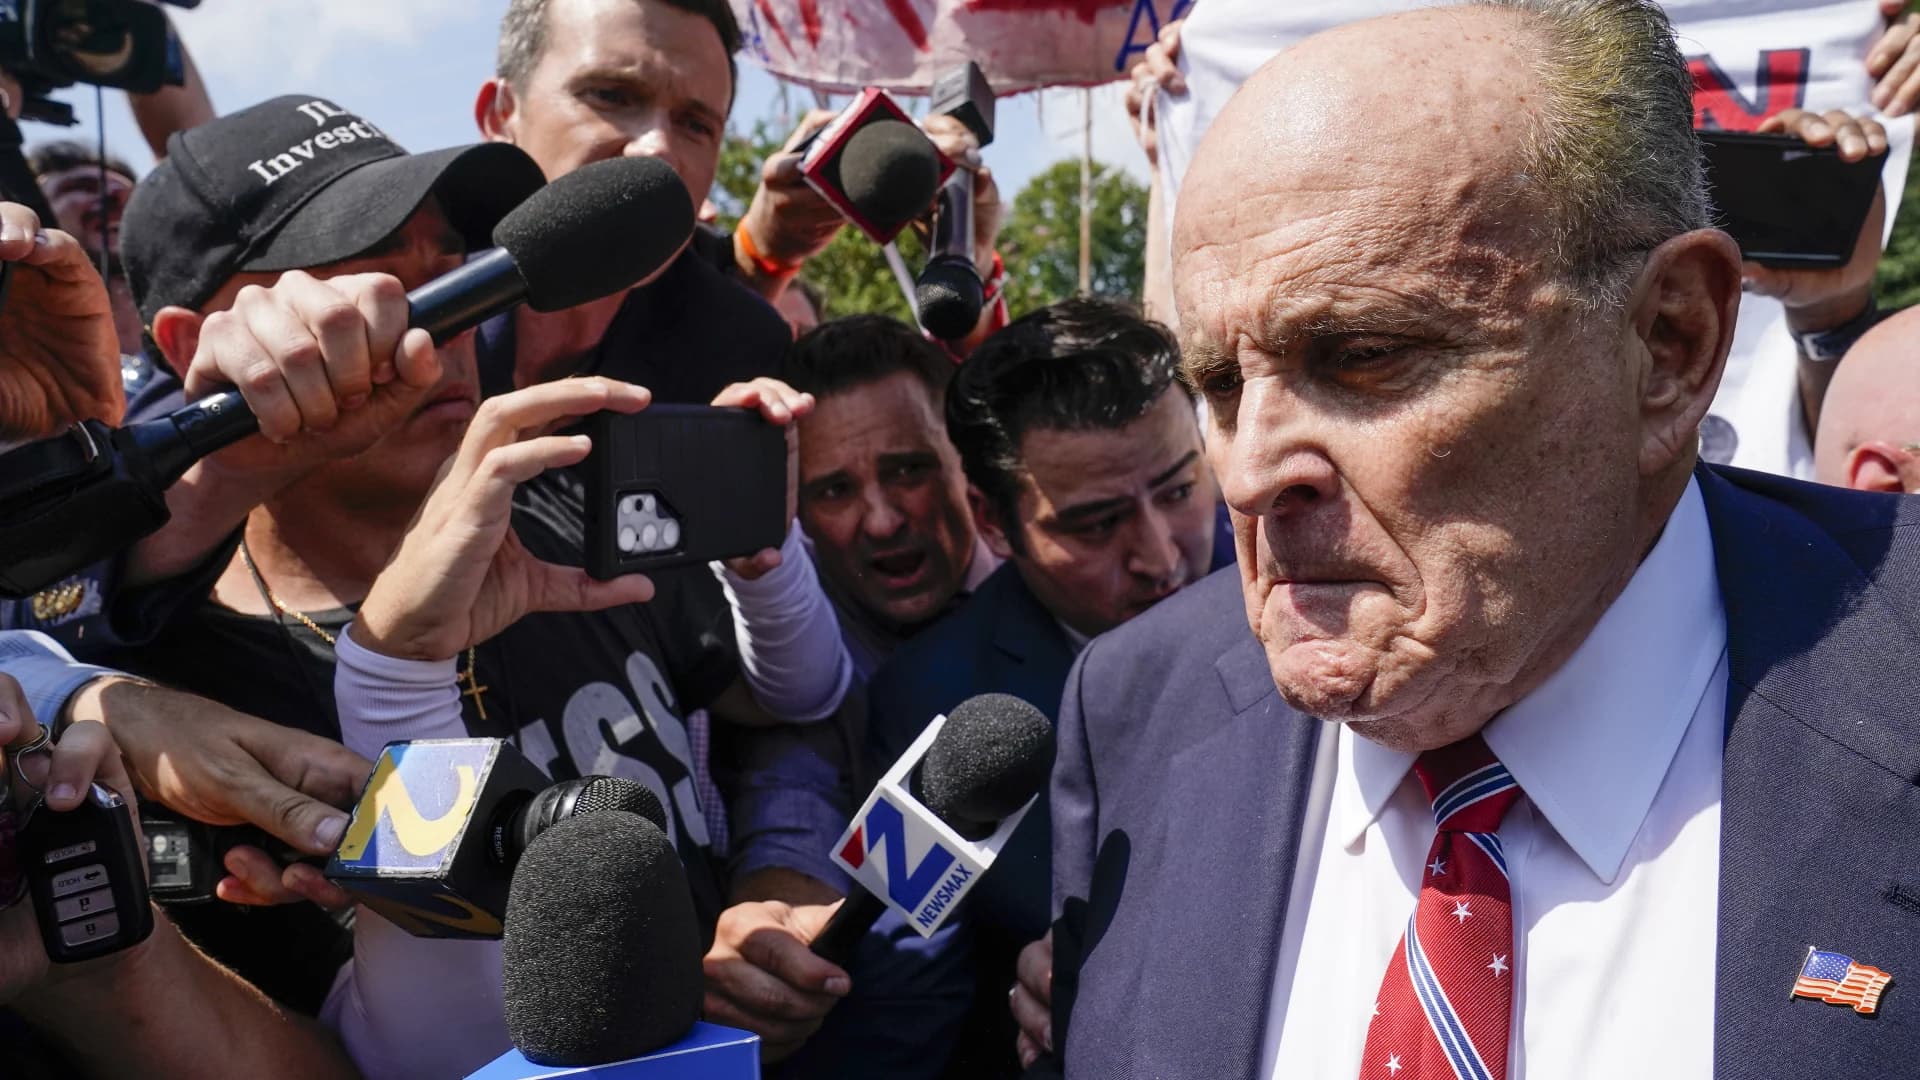 Rudy Giuliani pleads not guilty to charges in Georgia election case